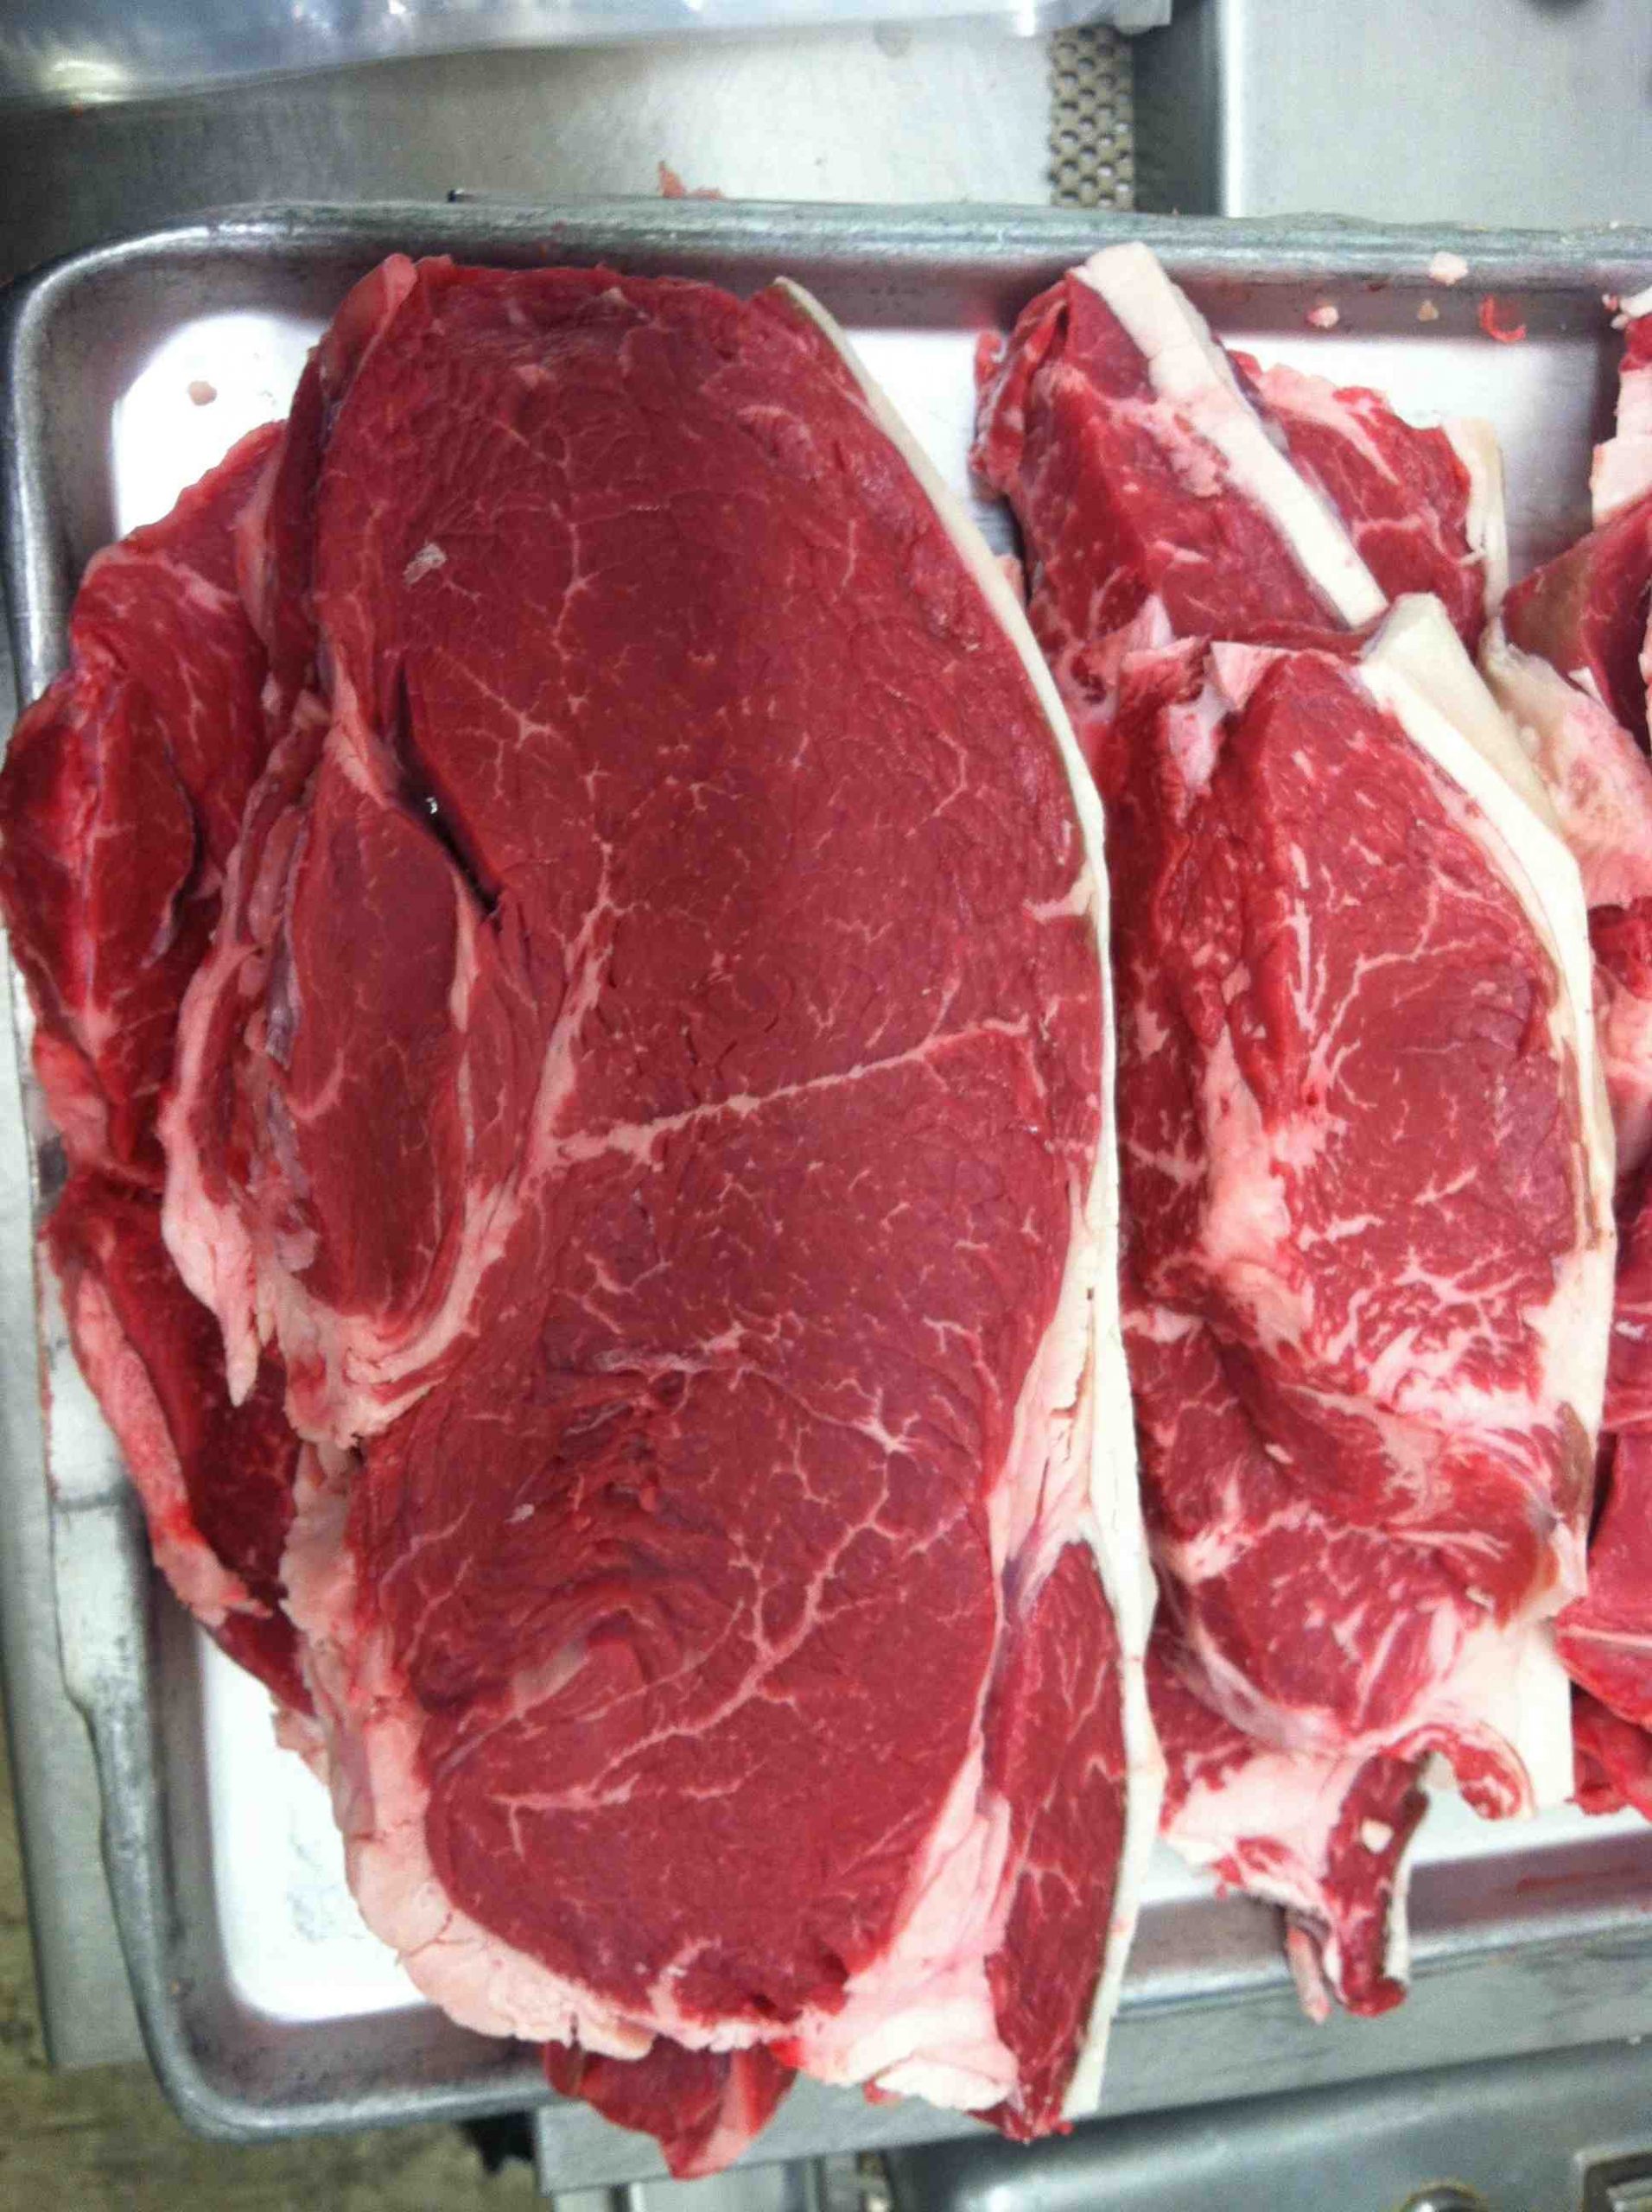 Is Discoloured meat safe to eat?